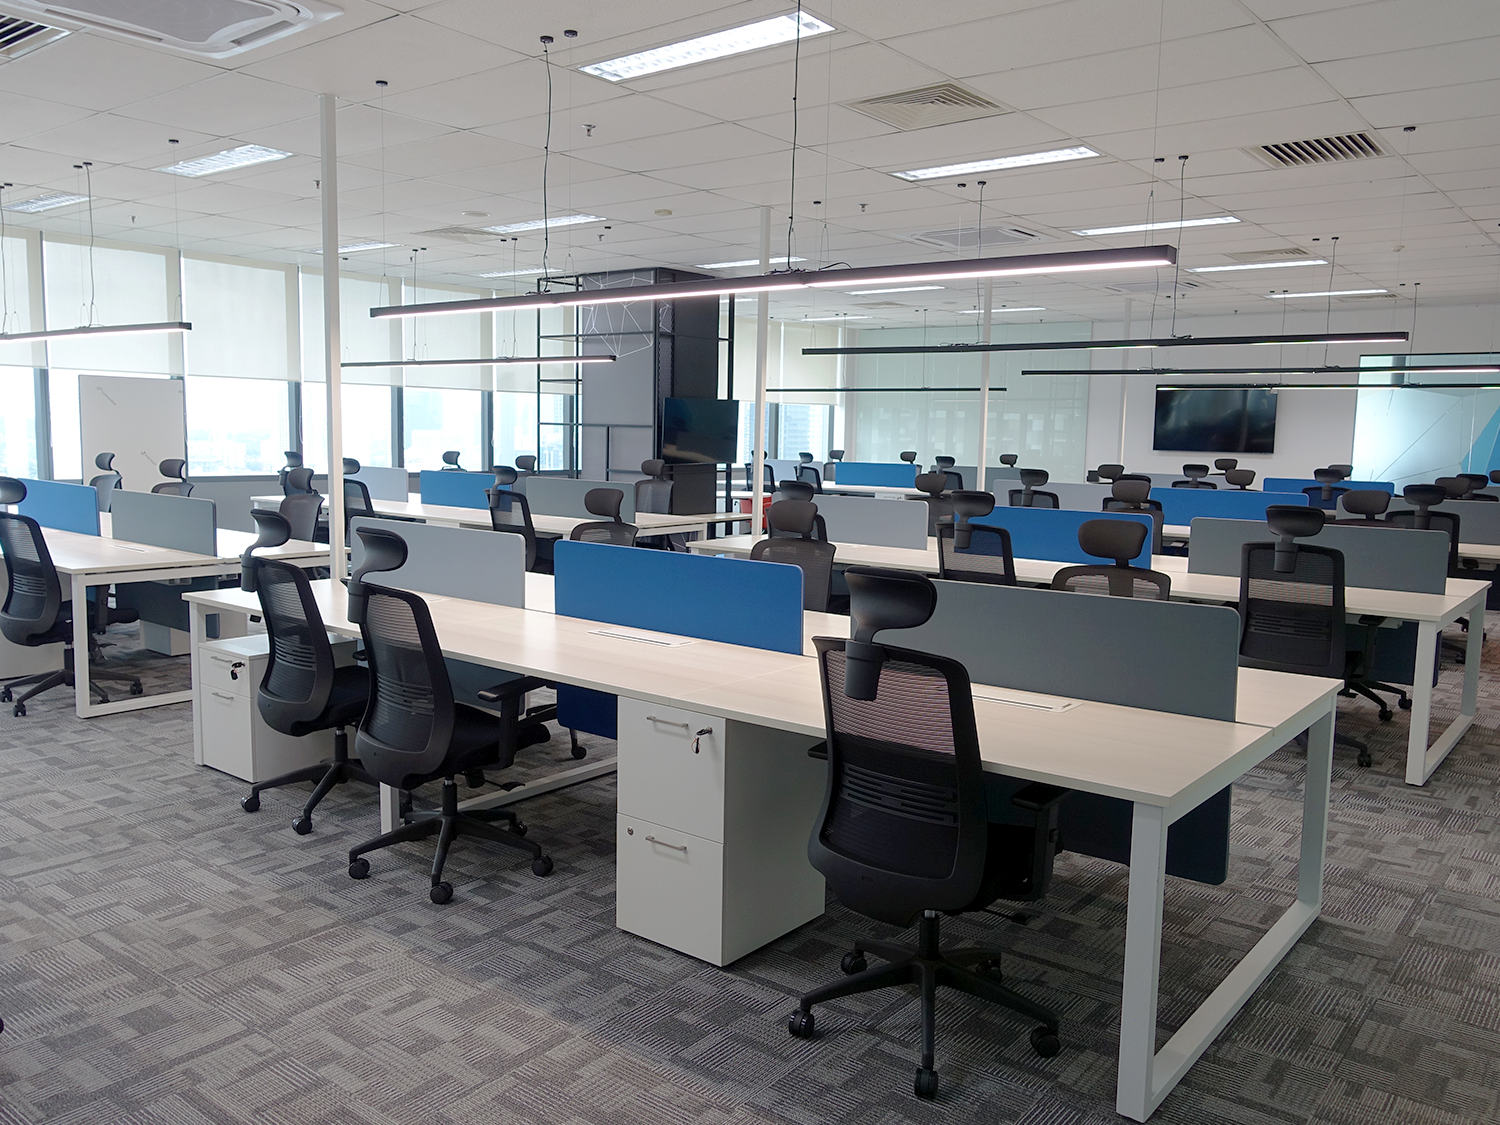 Virtuos (KL) | Office Furniture Project Malaysia | Matic Degree